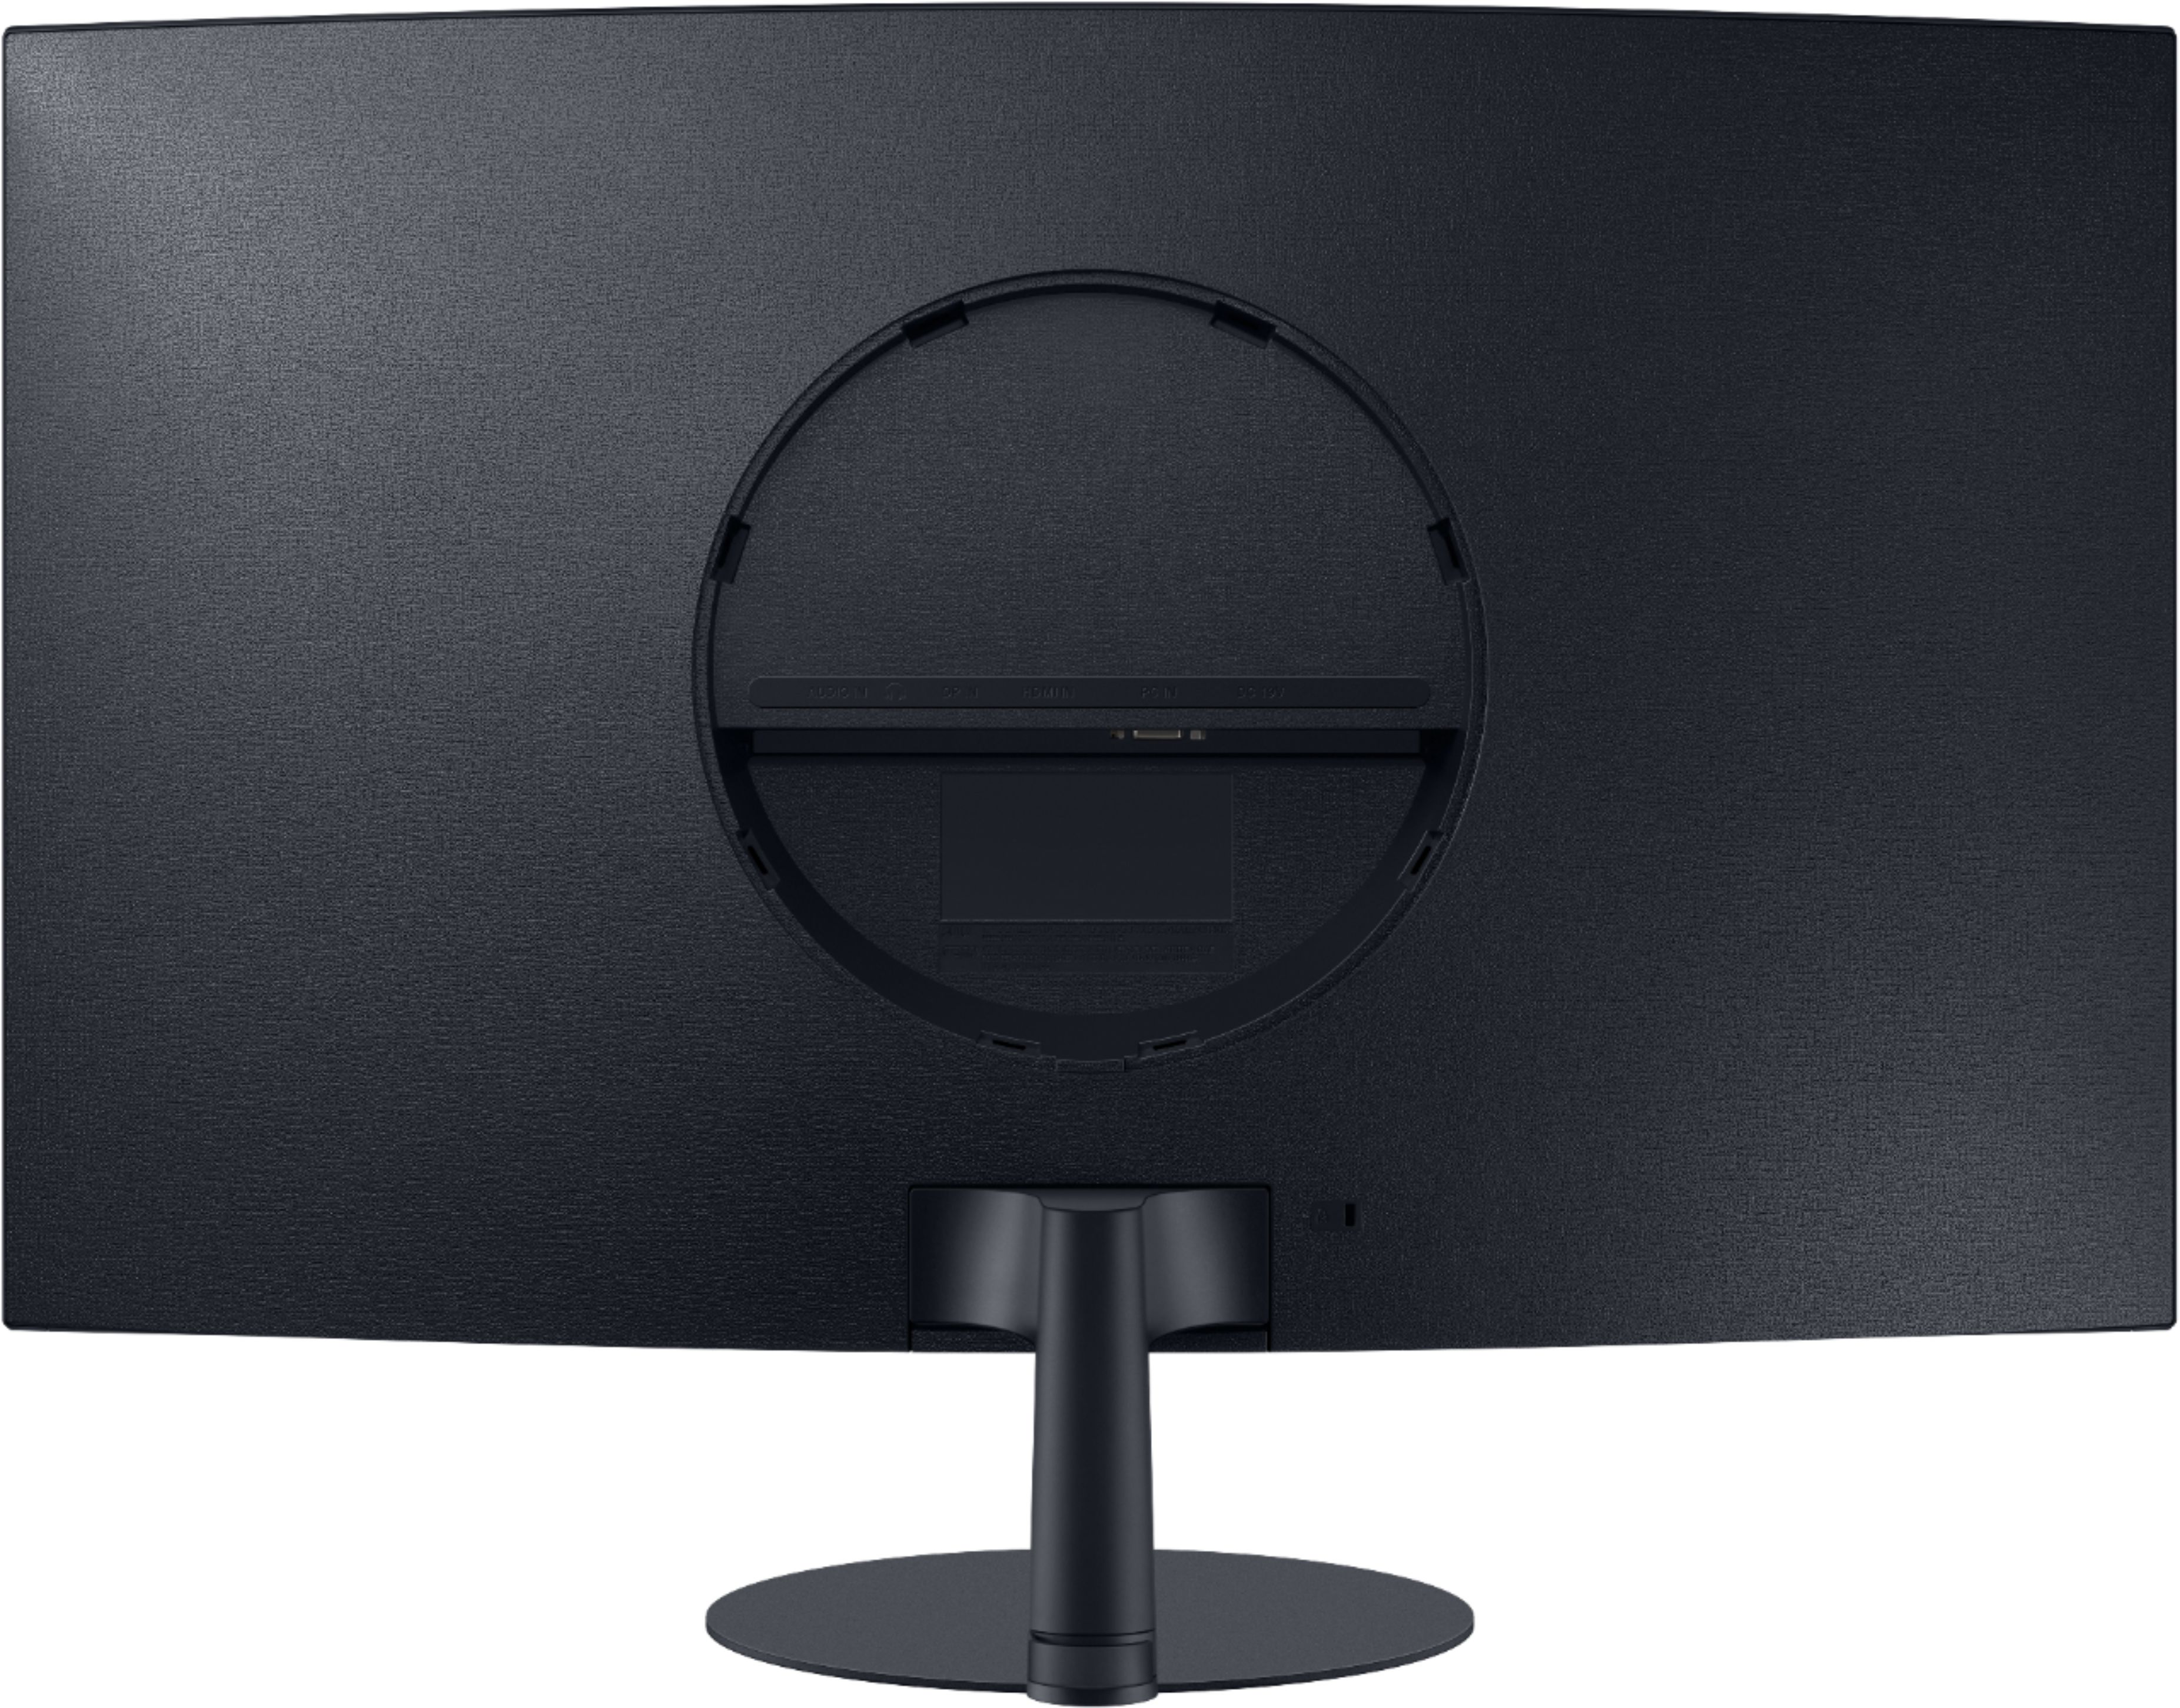 Back View: Samsung - Geek Squad Certified Refurbished T55 Series 32" LED 1000R Curved FHD FreeSync Monitor - Dark Gray/Blue